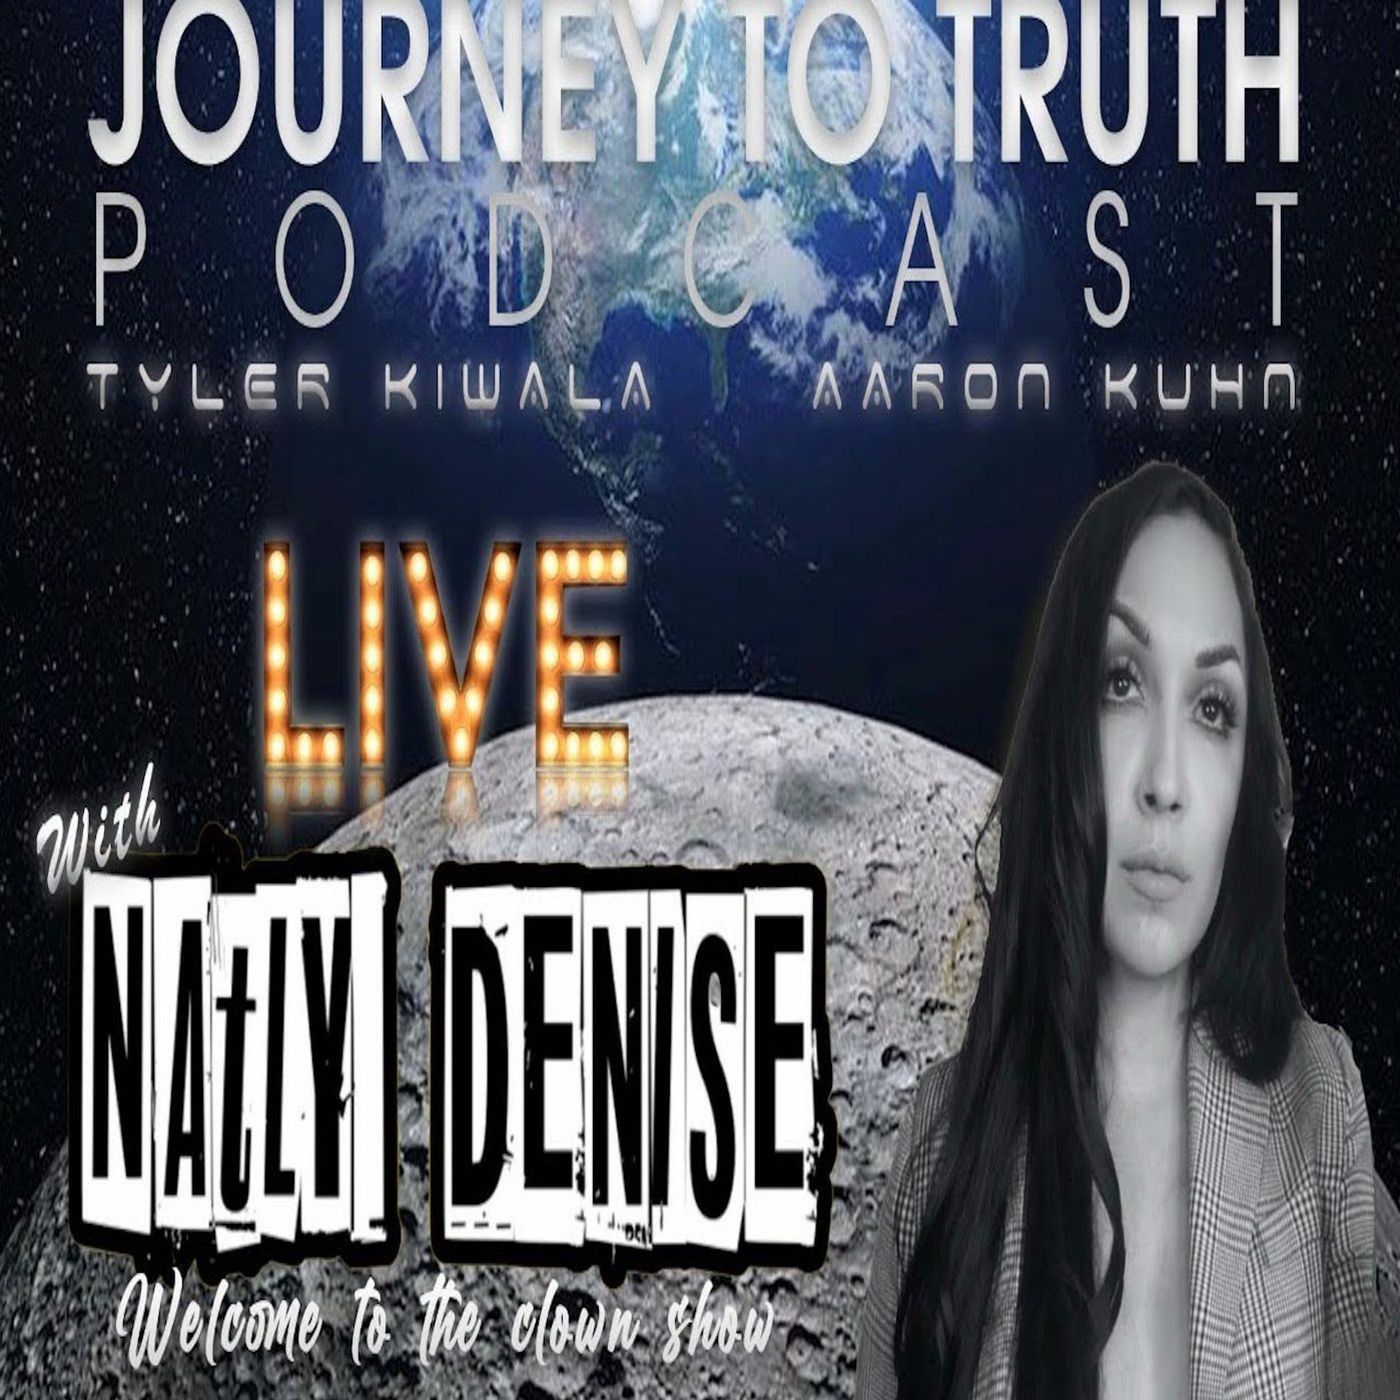 EP 123 -Natly Denise - Welcome To The Clown Show - Bill & Melinda - 'THE BIG LIE' - Border Situation